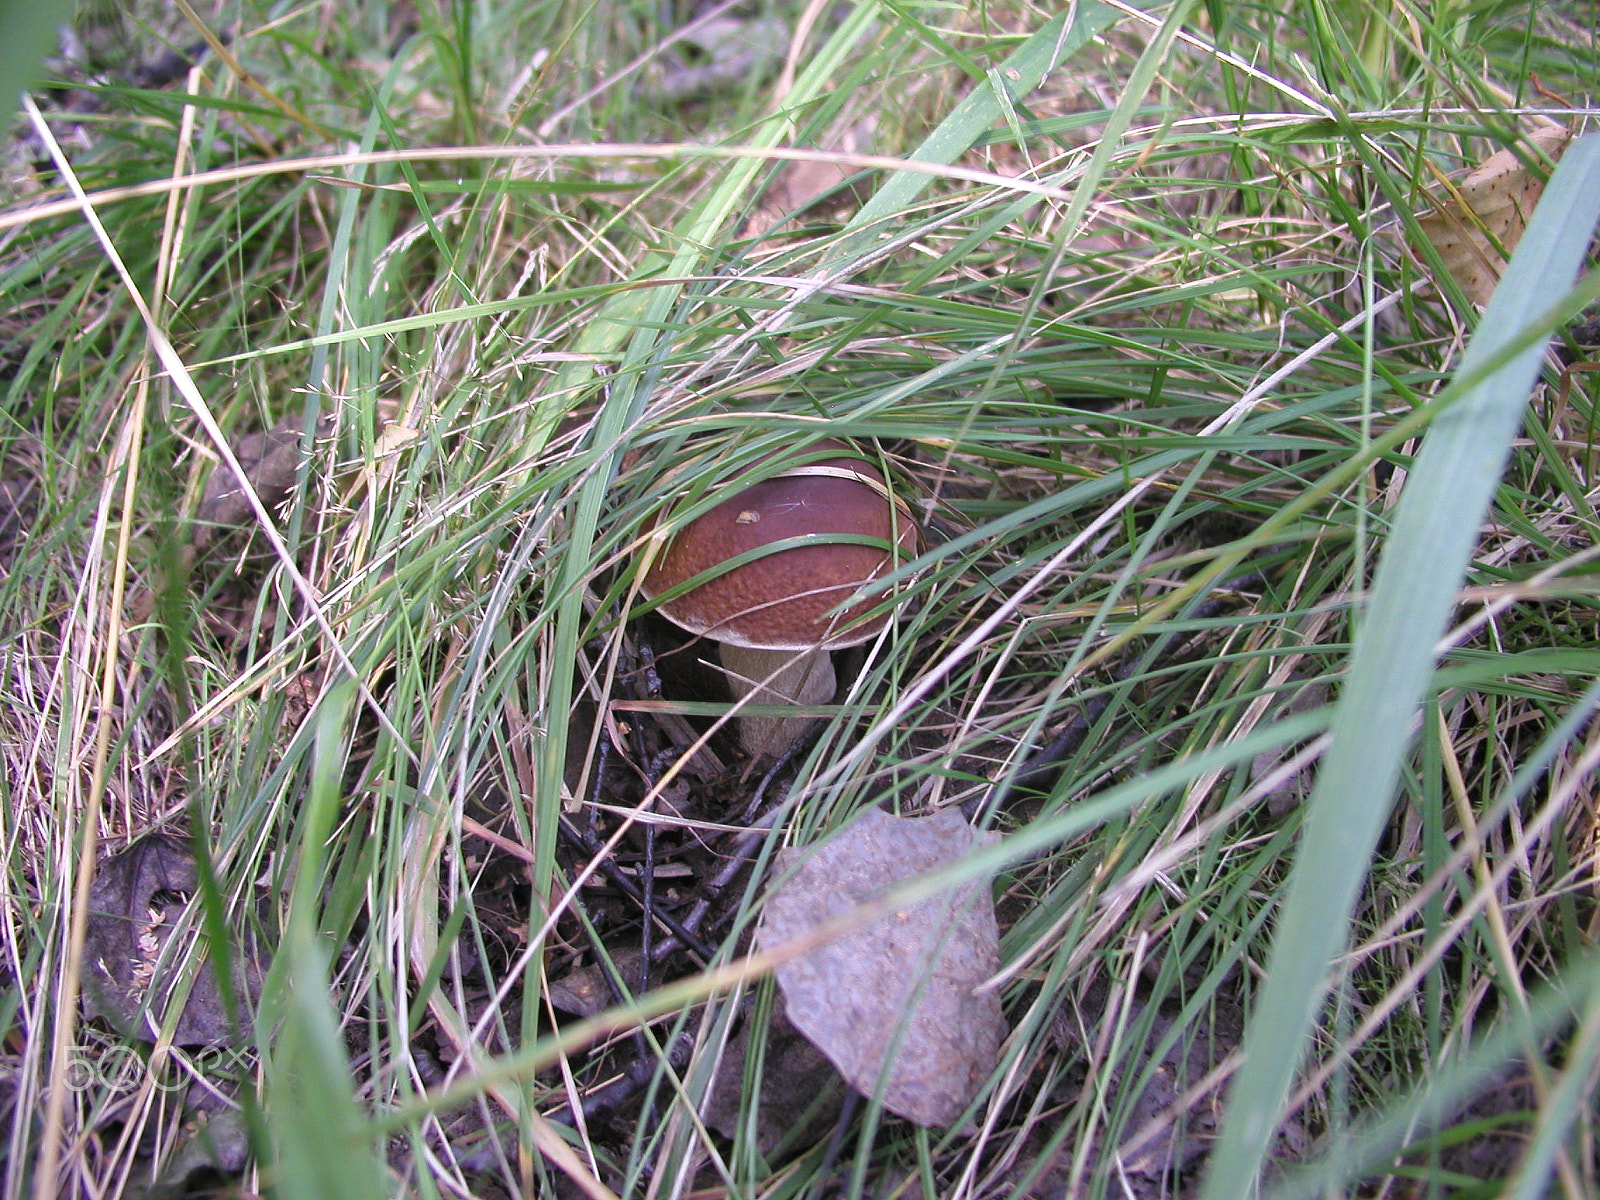 Olympus C4040Z sample photo. Forest mushrooms. edible mushrooms in the forest litter photography